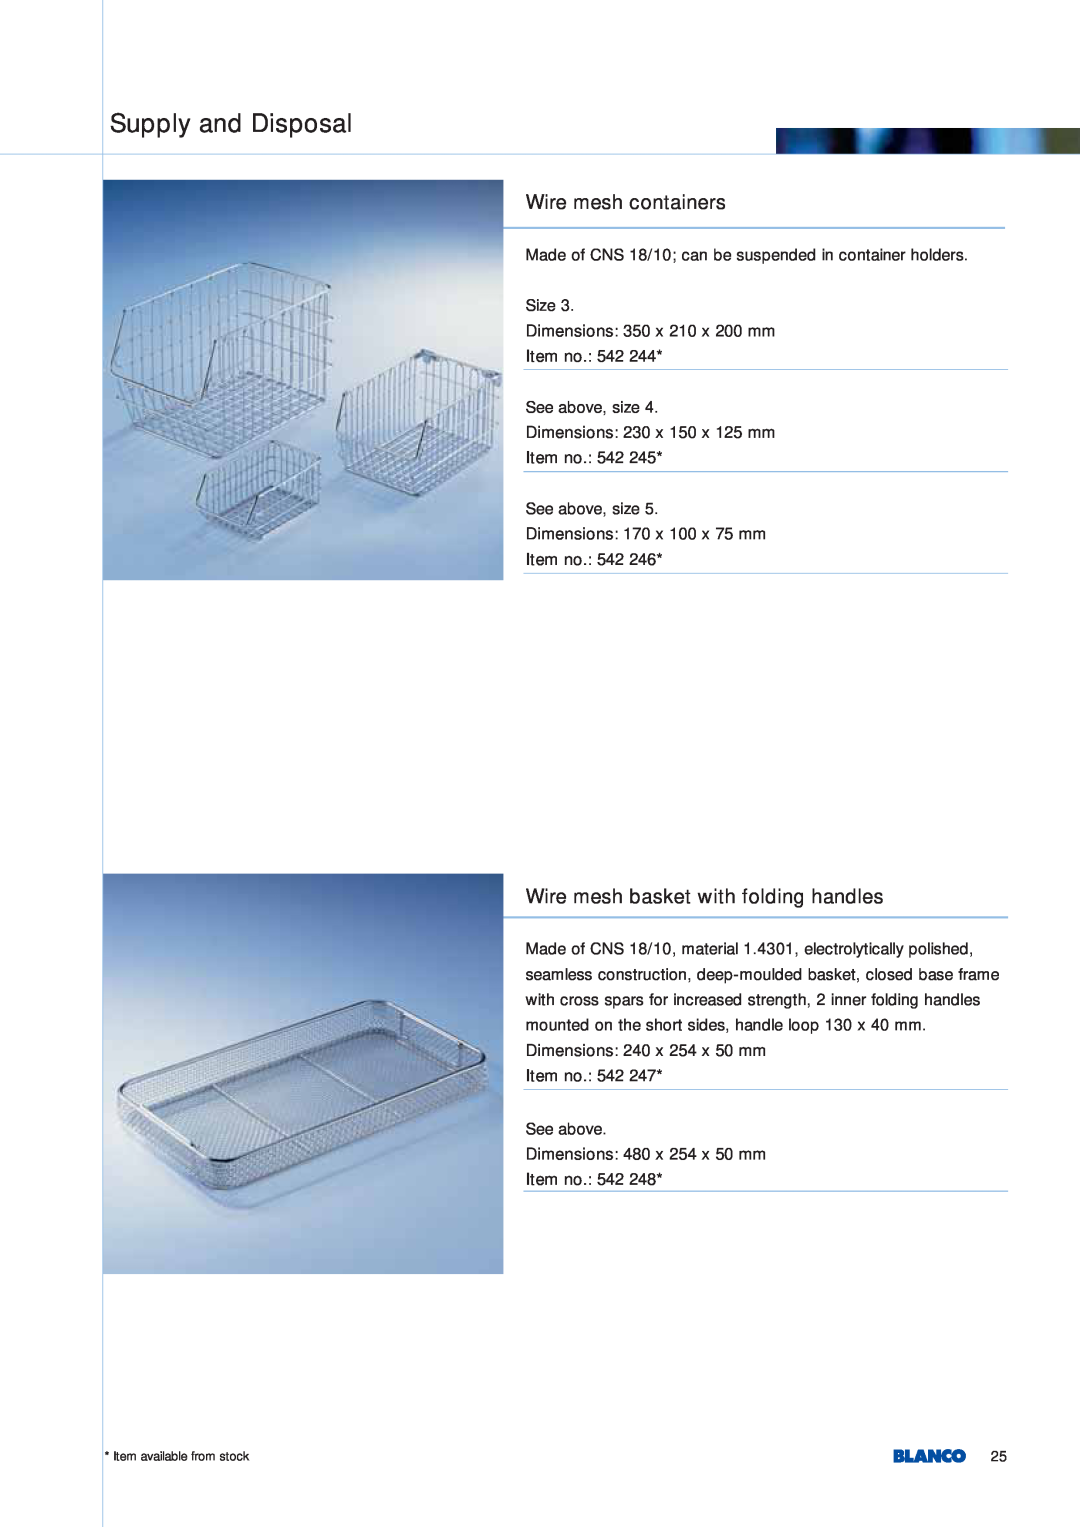 Blanco Tbingen manual Wire mesh containers, Wire mesh basket with folding handles, Supply and Disposal 